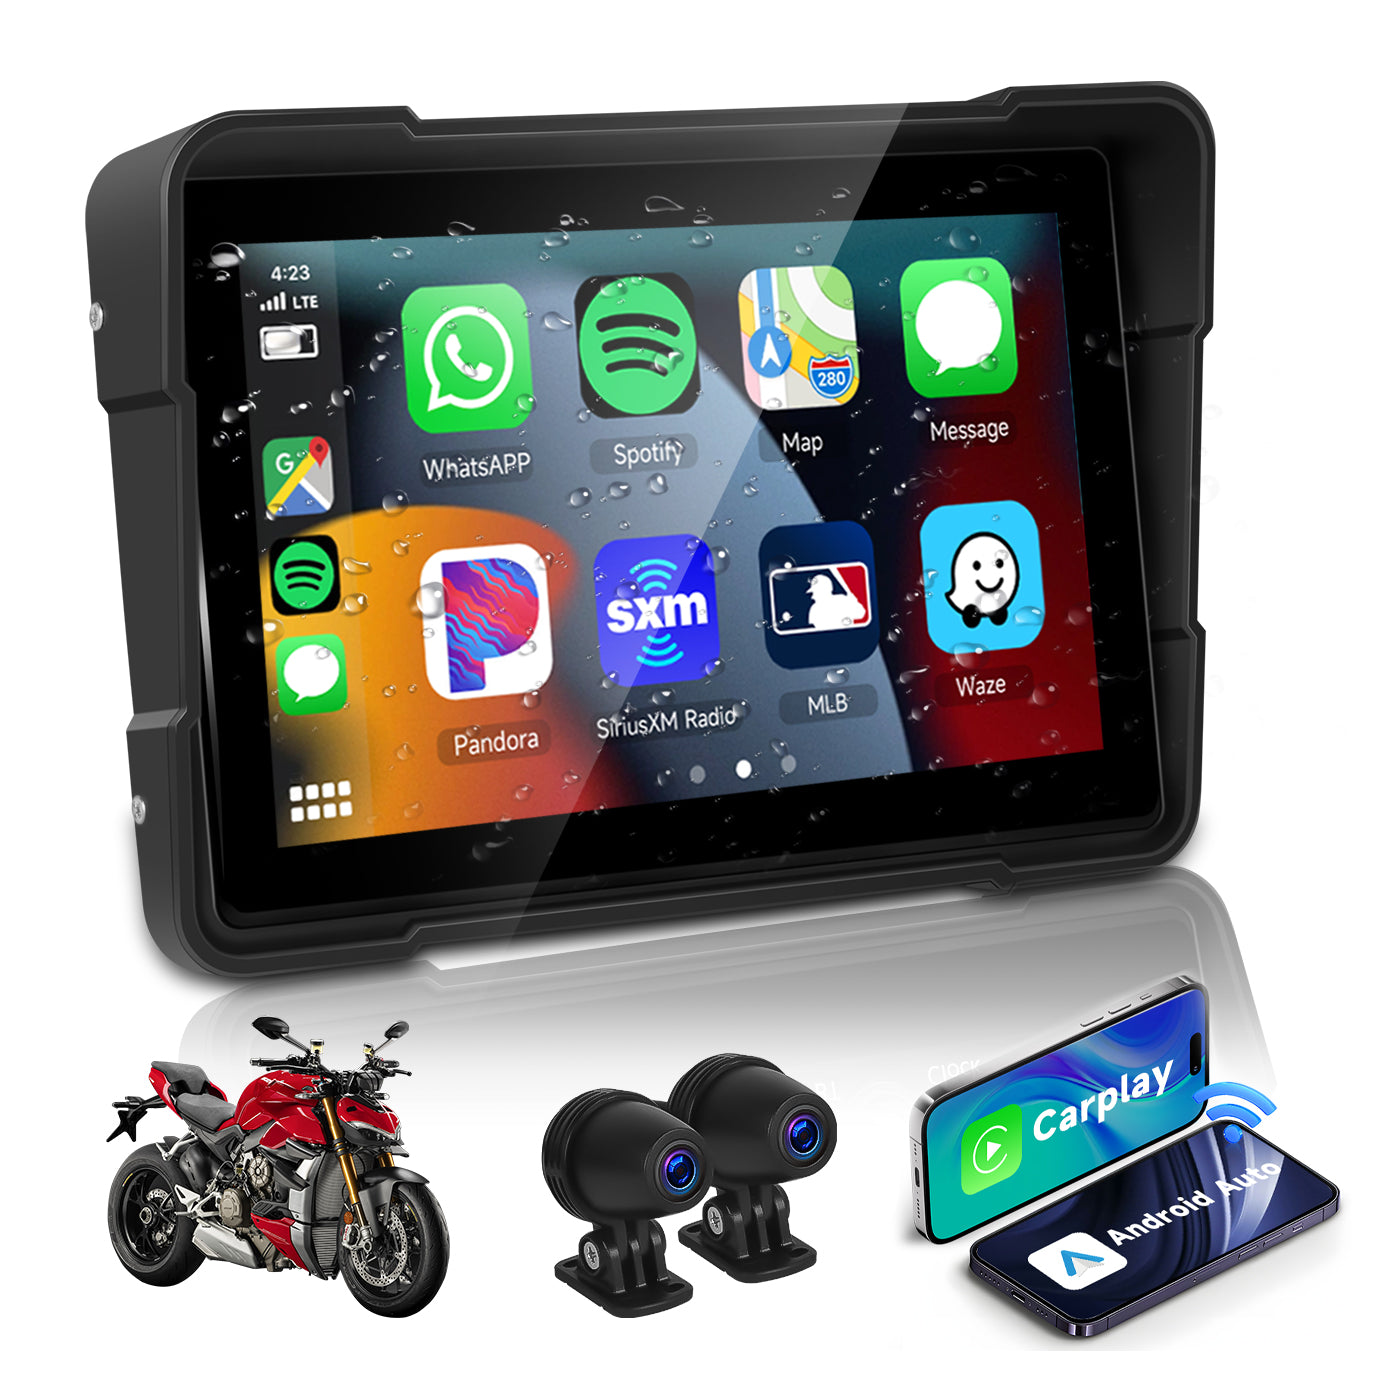 Zmecar 5-inch Motorcycle Carplay Wireless Android Auto Screen IP67 Waterproof screen, Dual Bluetooth system, Support DVR Two Cameras